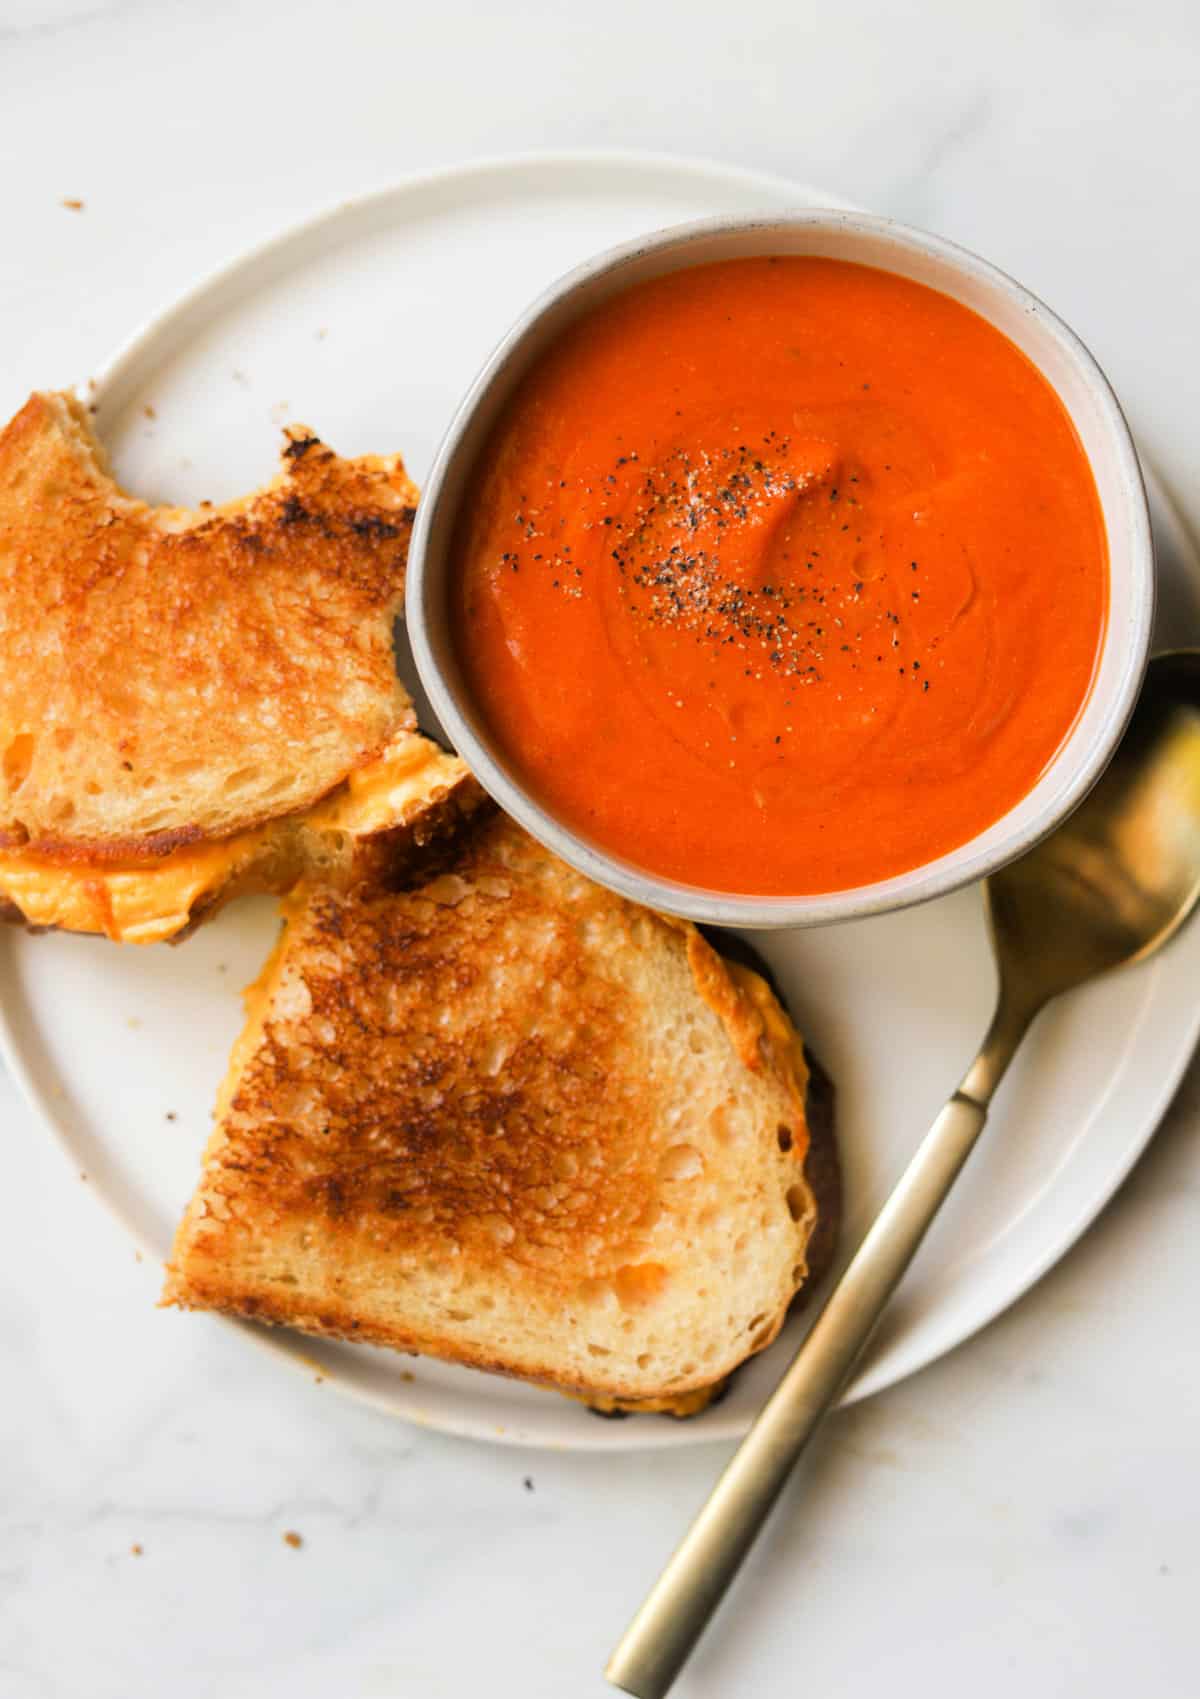 An overhead shot of a bowl of creamy tomato soup on top of a plate with a half eaten grilled cheese sandwich.